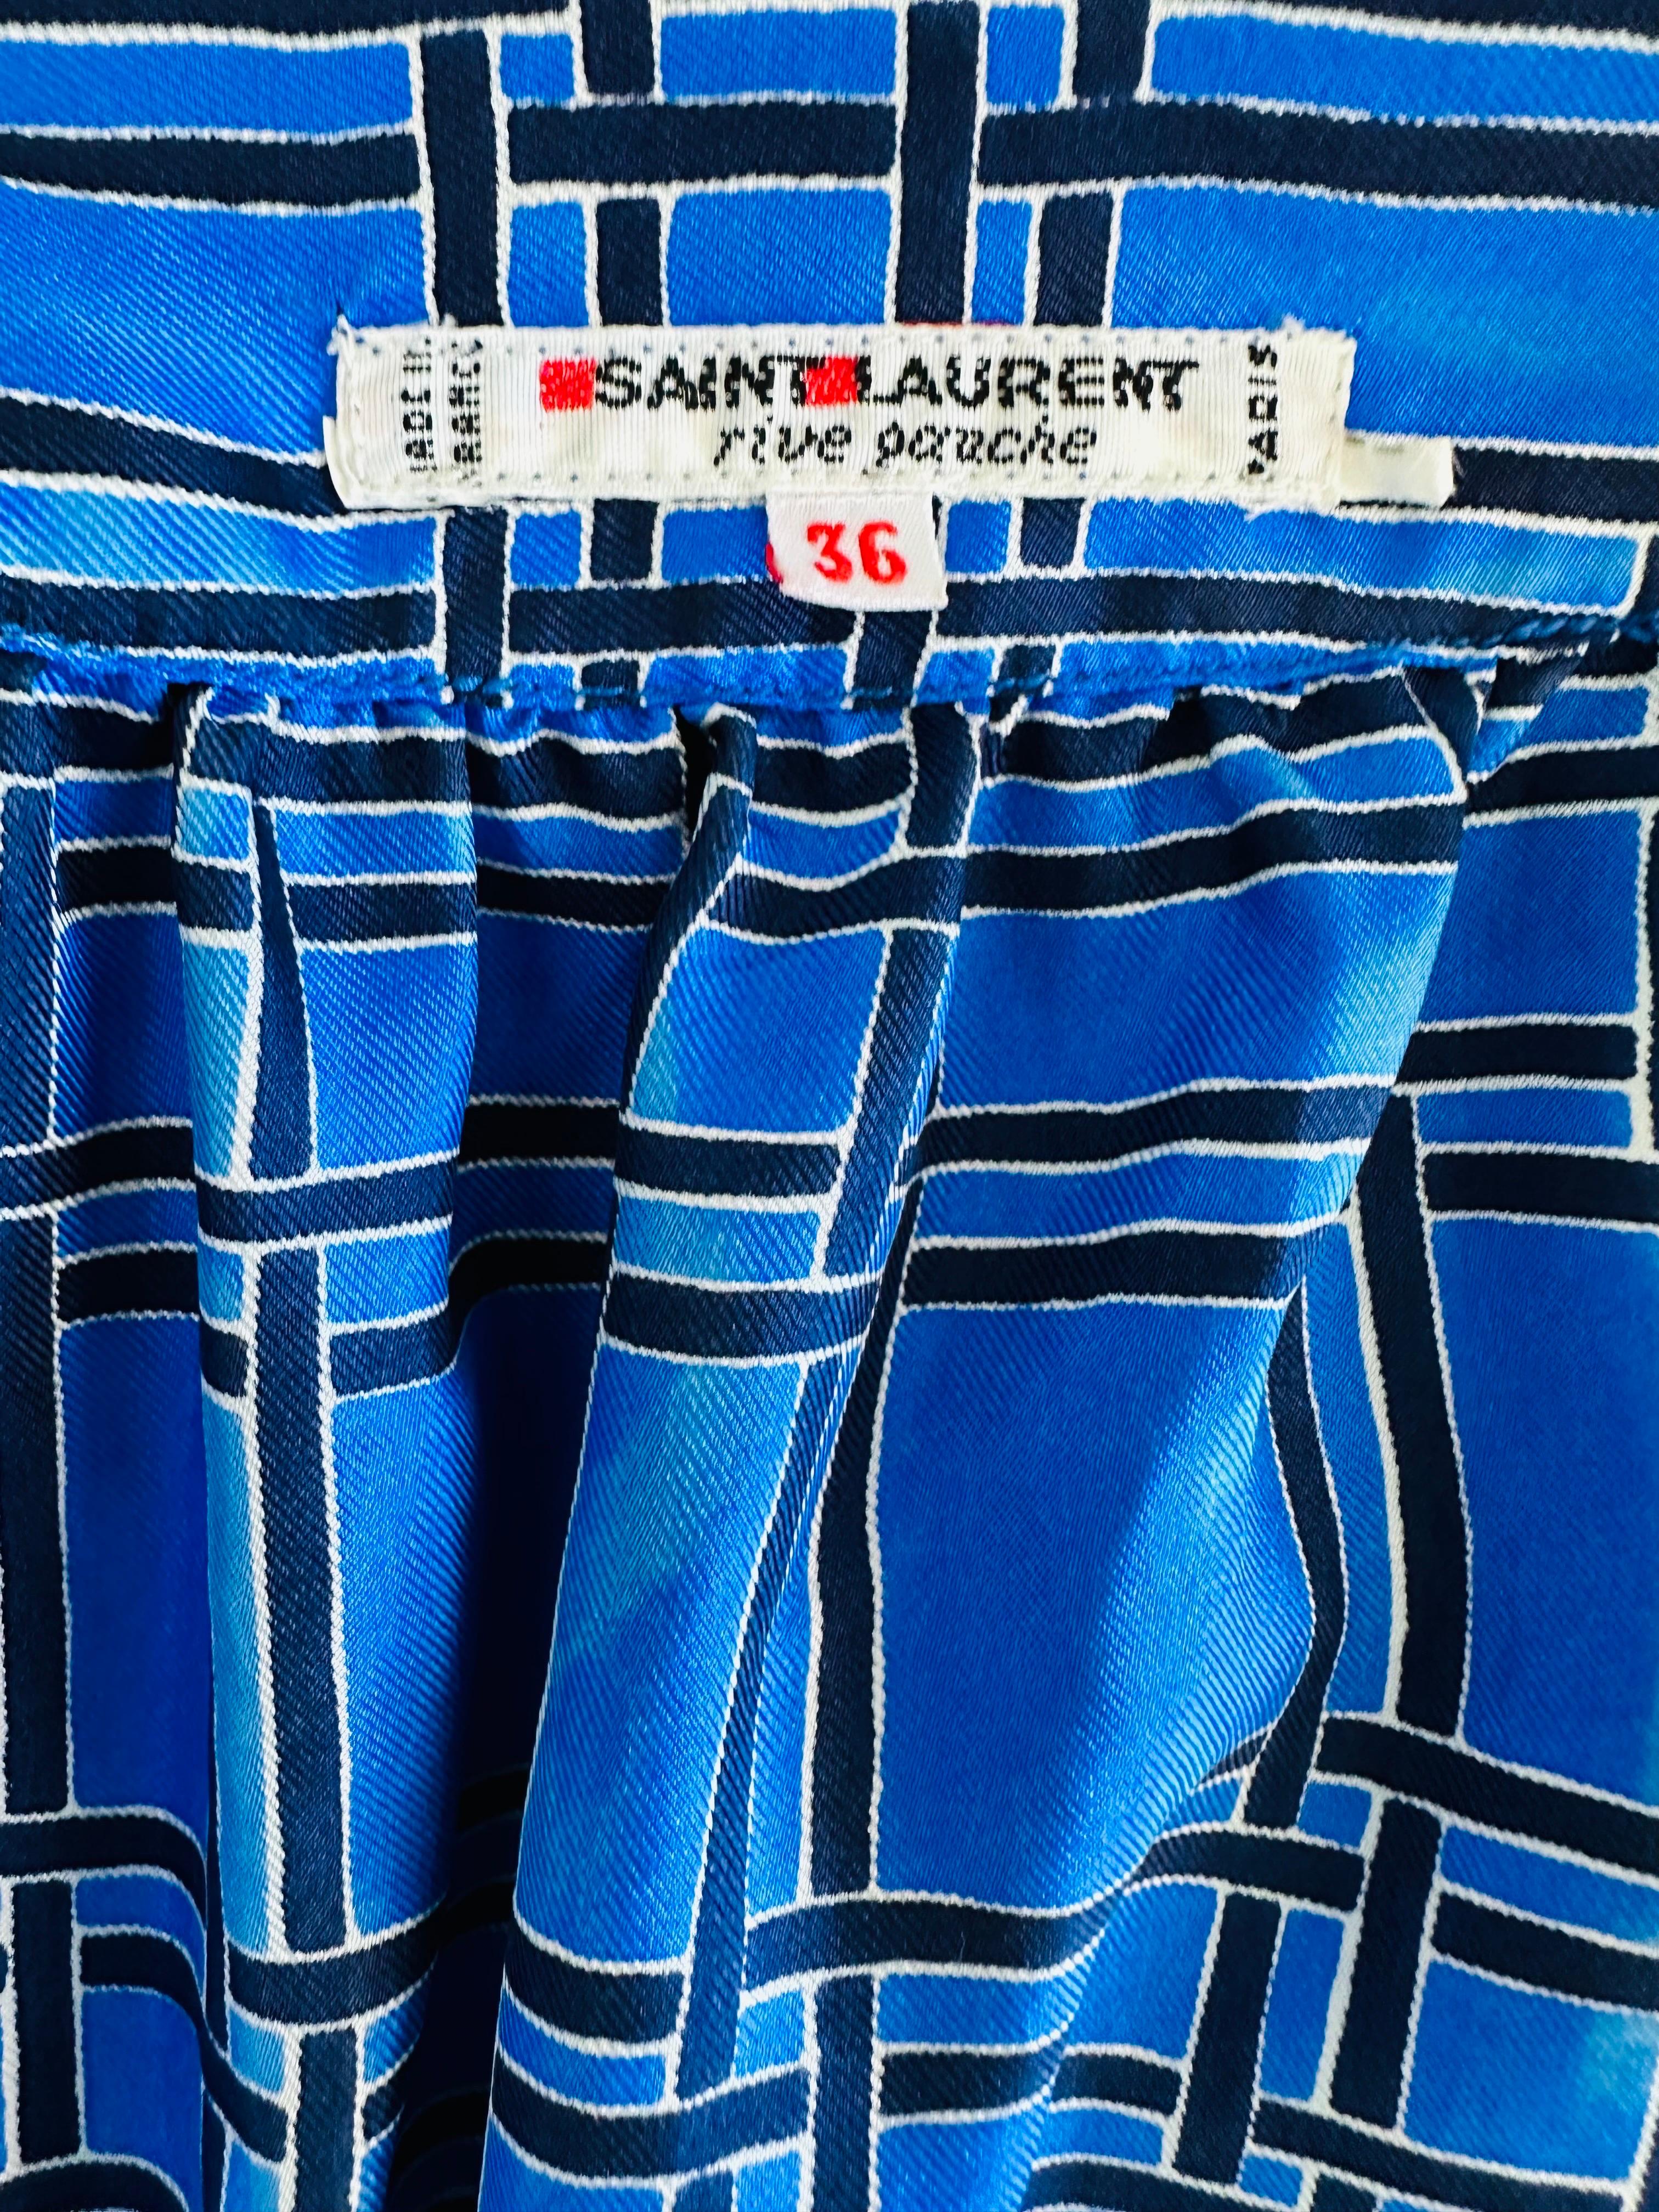 YSL Yves saint Laurent royal blue silk blouse from the 1970s For Sale 3